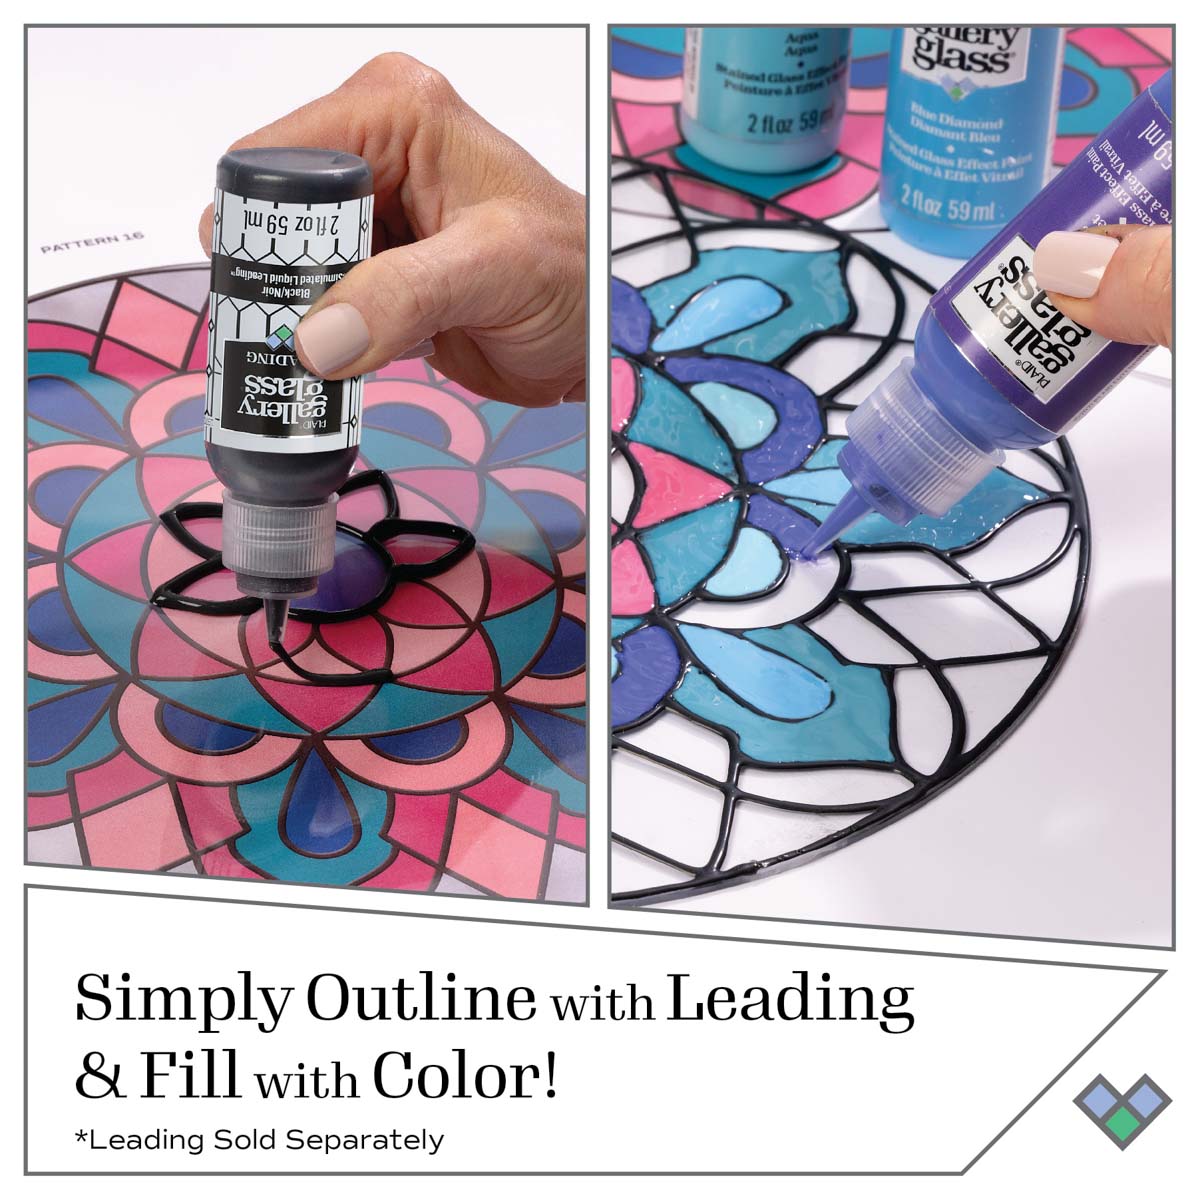 Gallery Glass ® Stained Glass Effect Paint - Autumn, 2 oz. - 19707